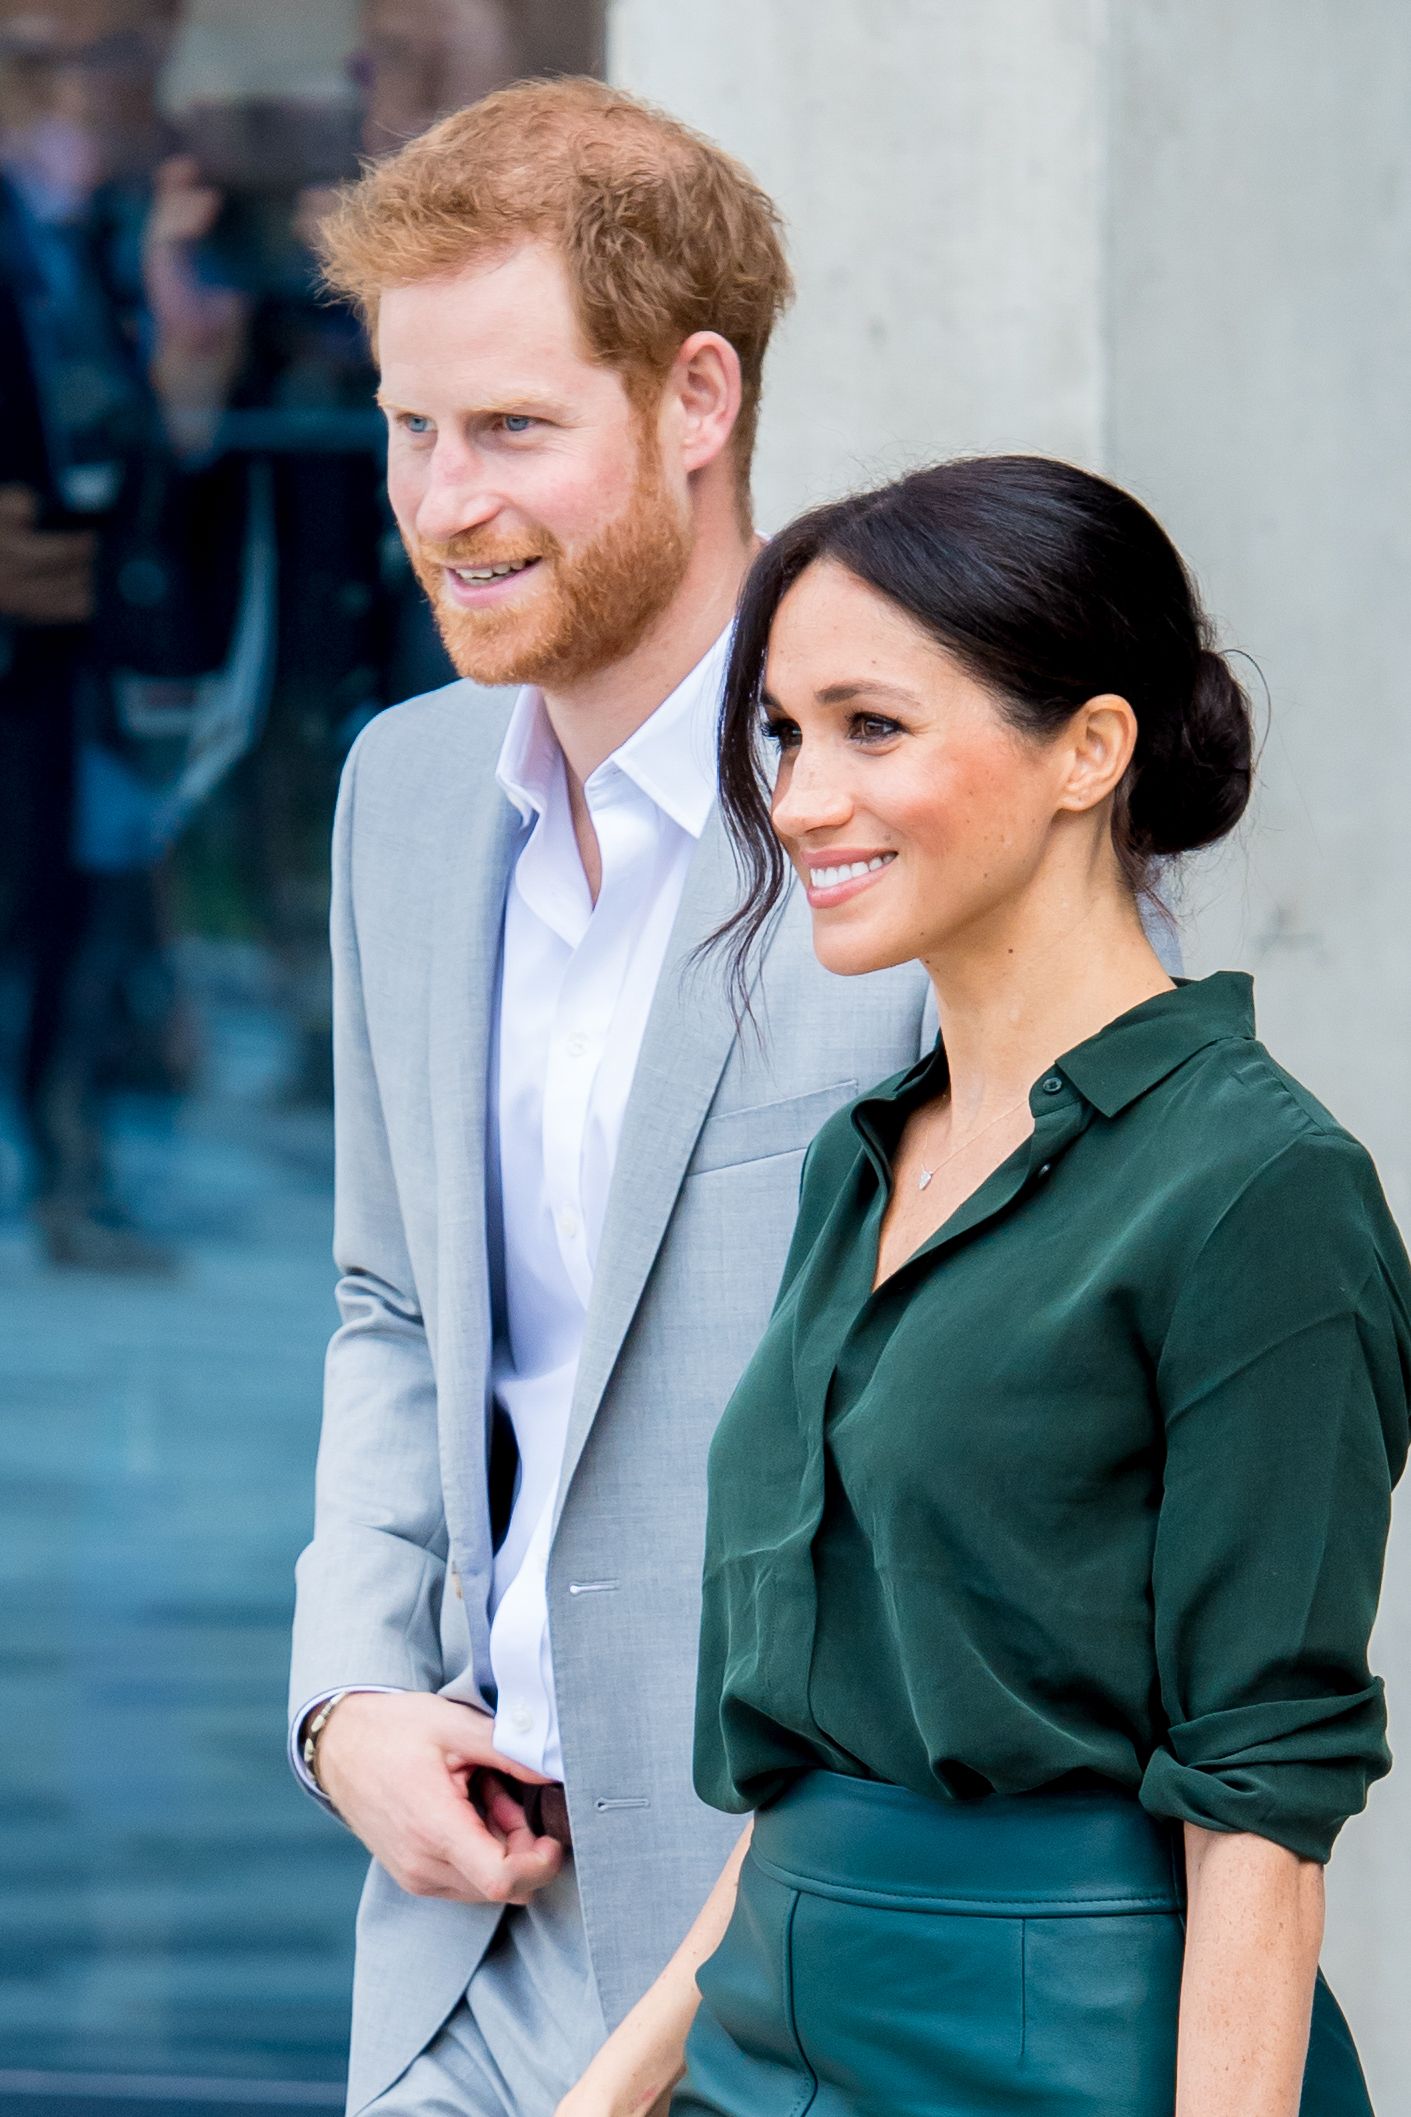 The Biggest Royals News Of 2020 Gallery Wonderwall Com See more of christophe willem on facebook. https www wonderwall com celebrity royals biggest royals news of 2020 queen prince harry meghan britain sweden spain japan more royal families icymi 405325 gallery